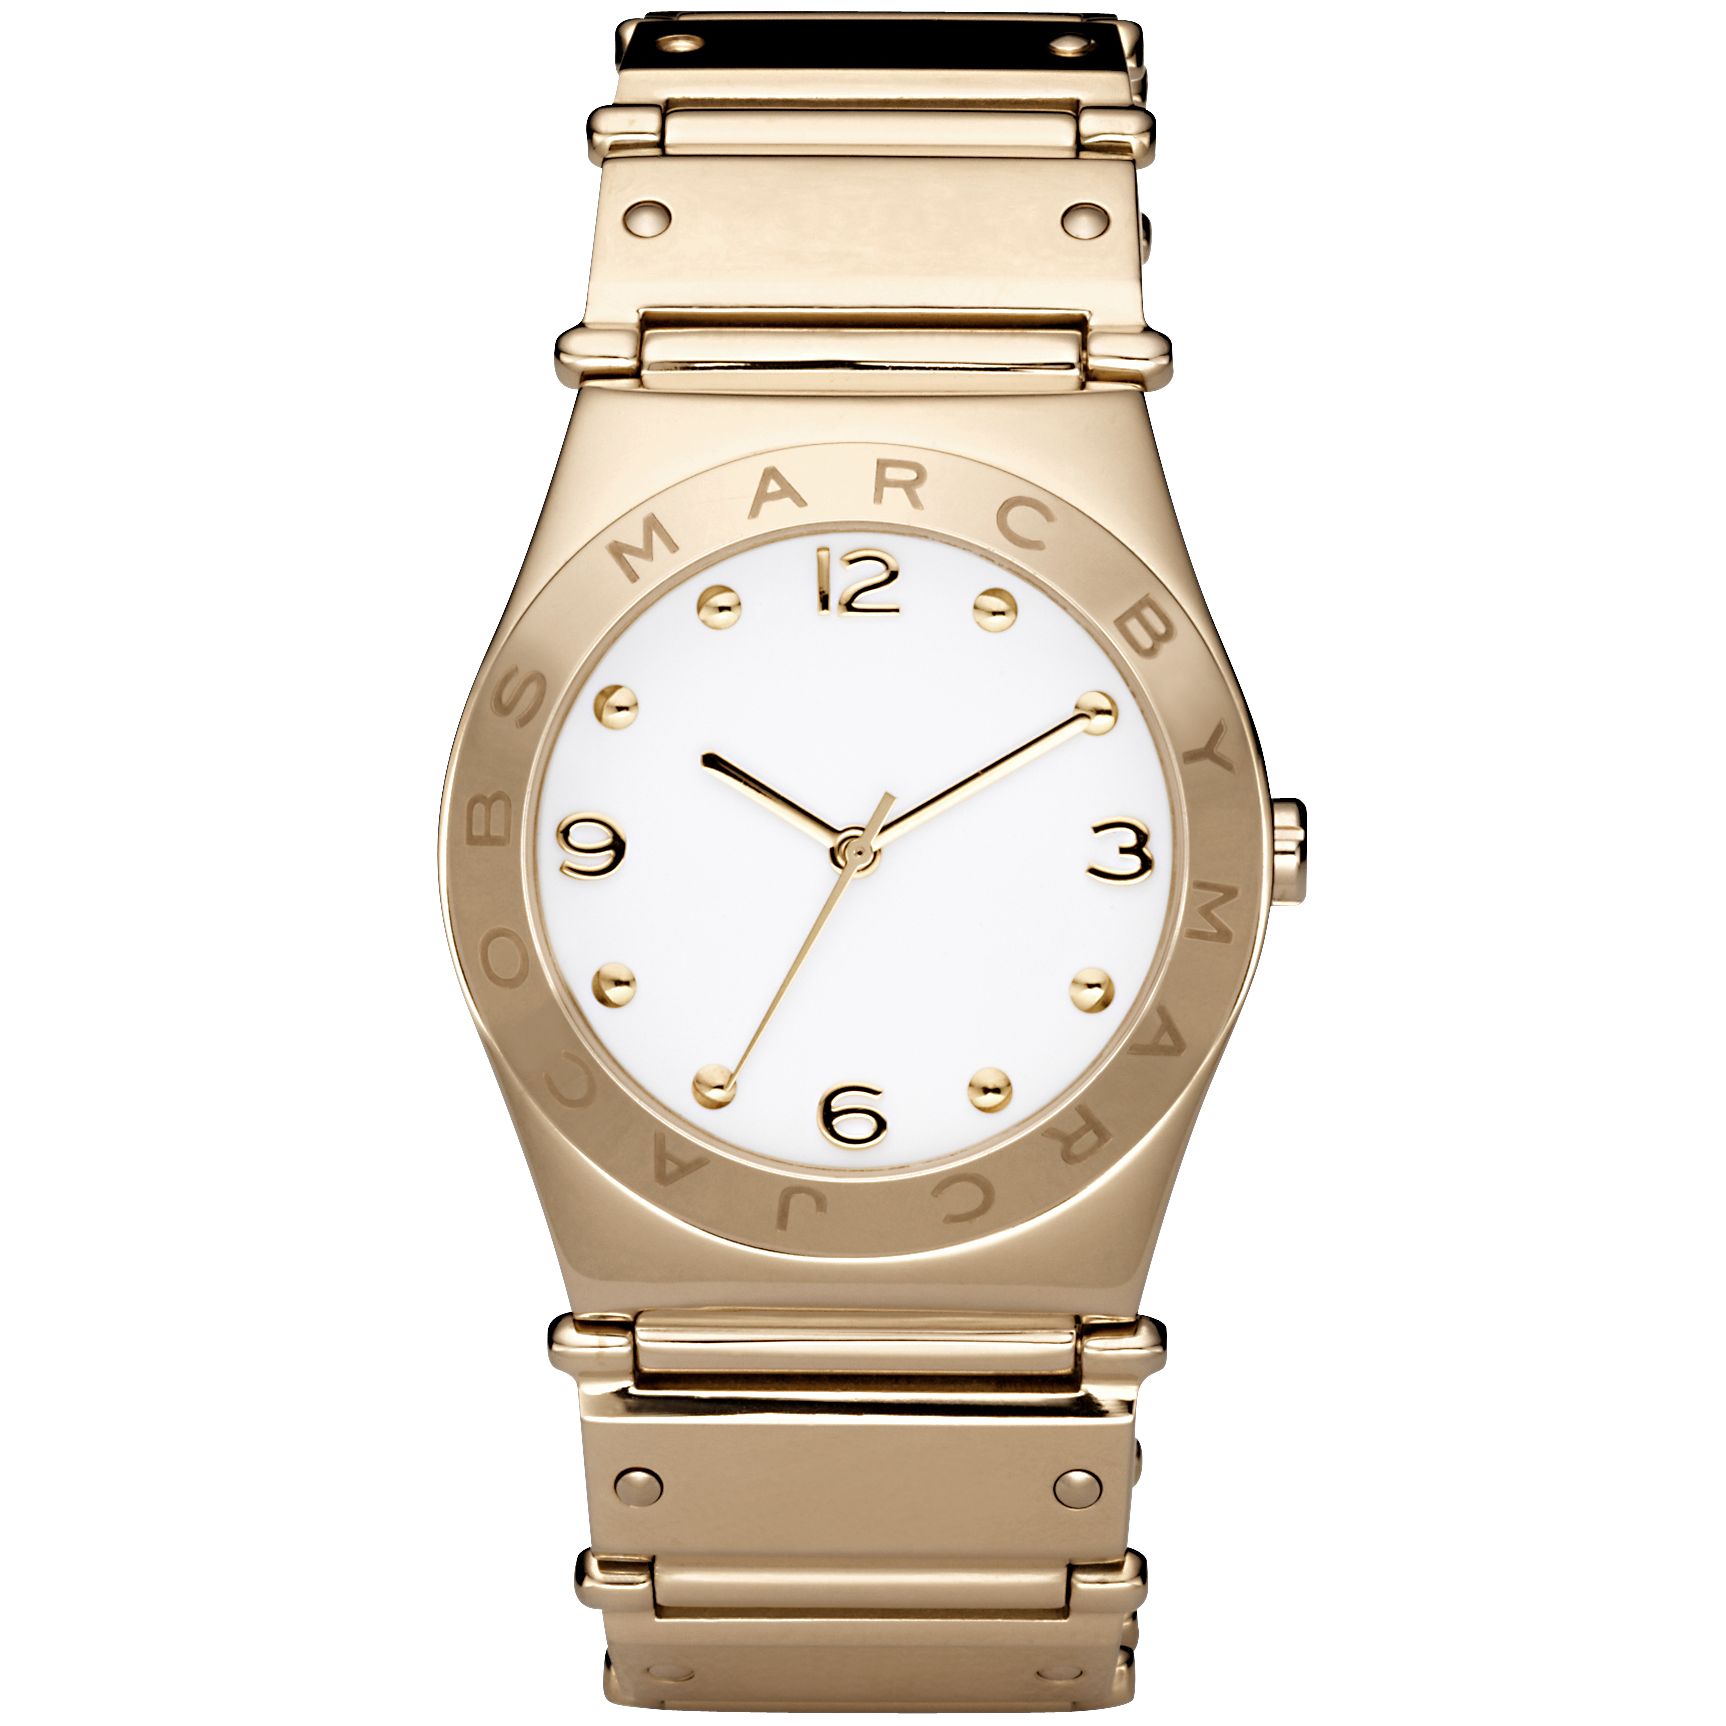 Marc by Marc Jacobs MBM8519 Women's Round White Dial Gold Plated Bracelet Watch at John Lewis